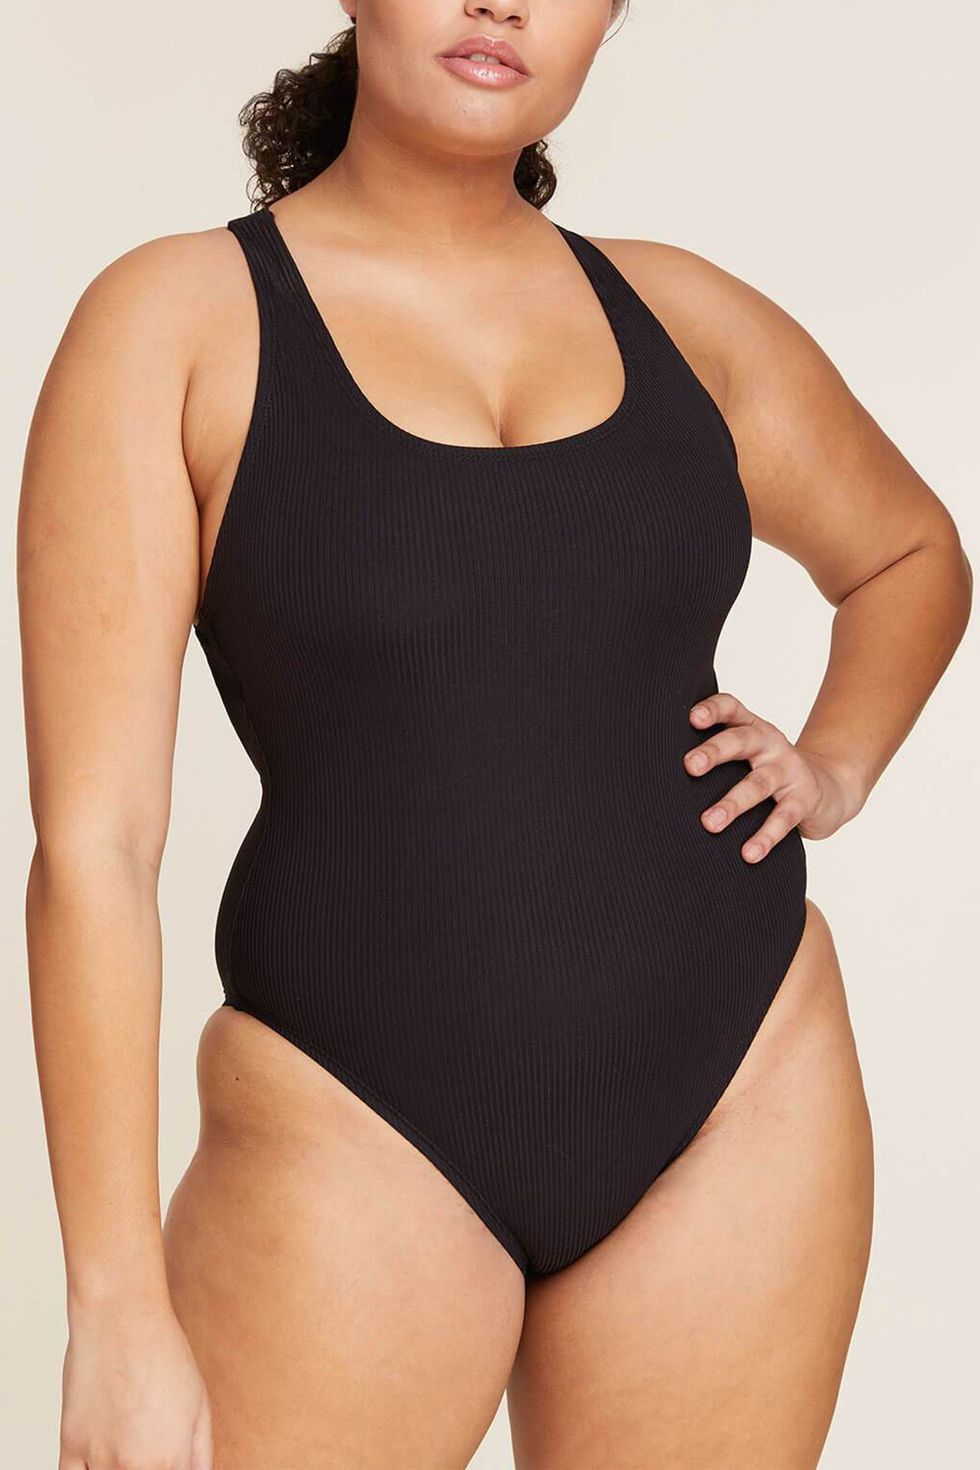 I'm plus-size with 38I boobs & did a Good American swim haul - the